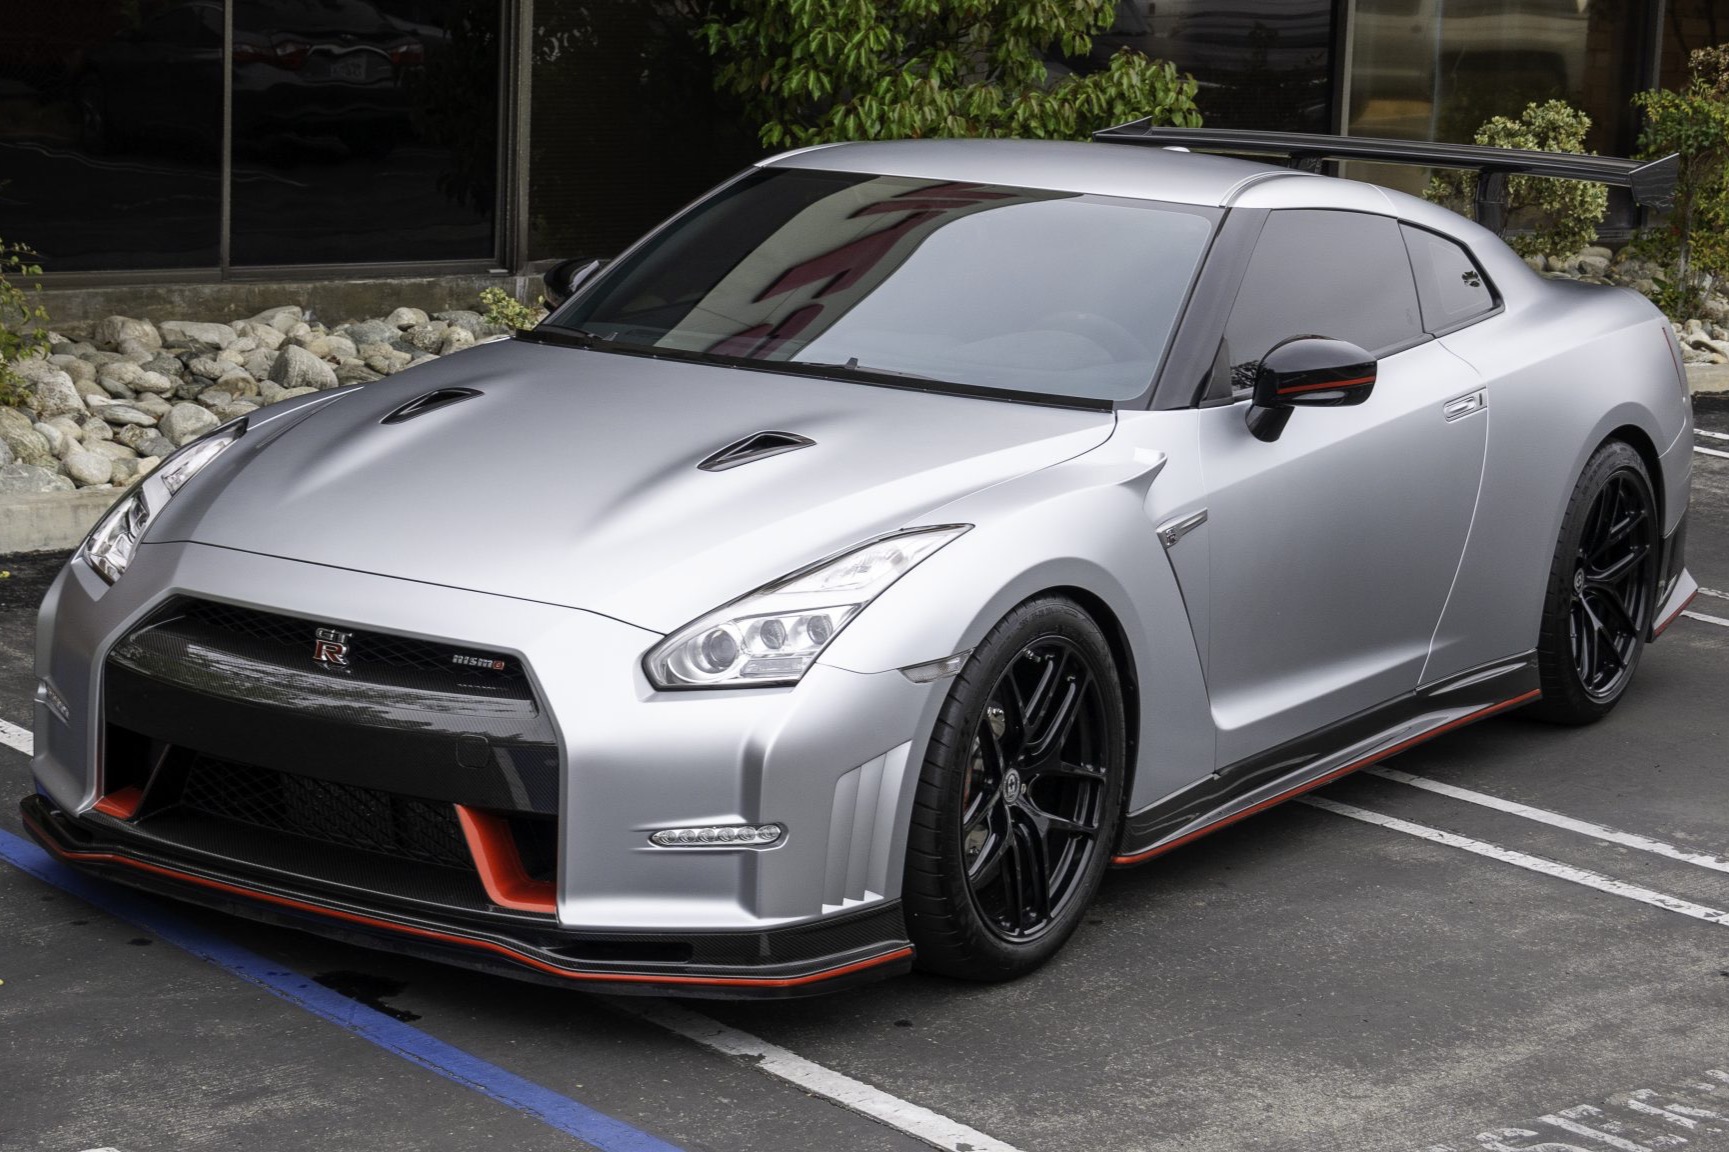 Used 2016 Nissan GT-R Nismo N-Attack Package A Review